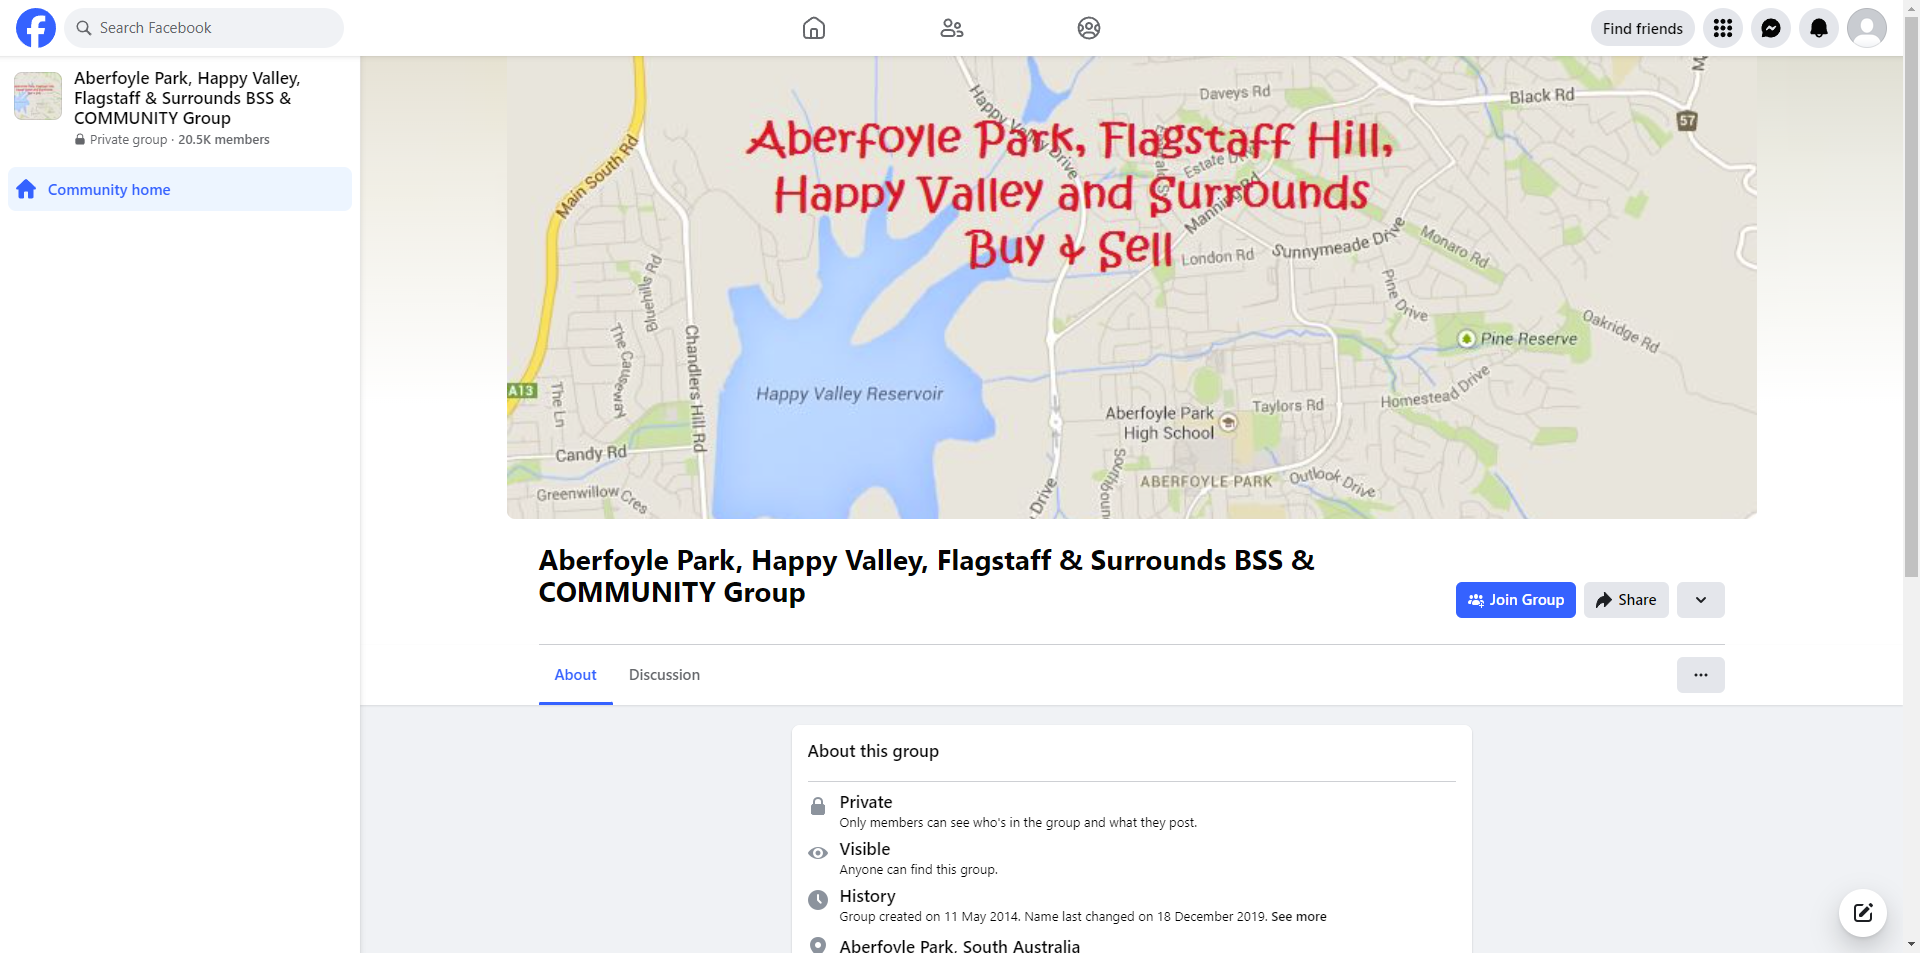 Aberfoyle Park, Flagstaff Hill, Happy Valley and Surrounds BSS & Community Group